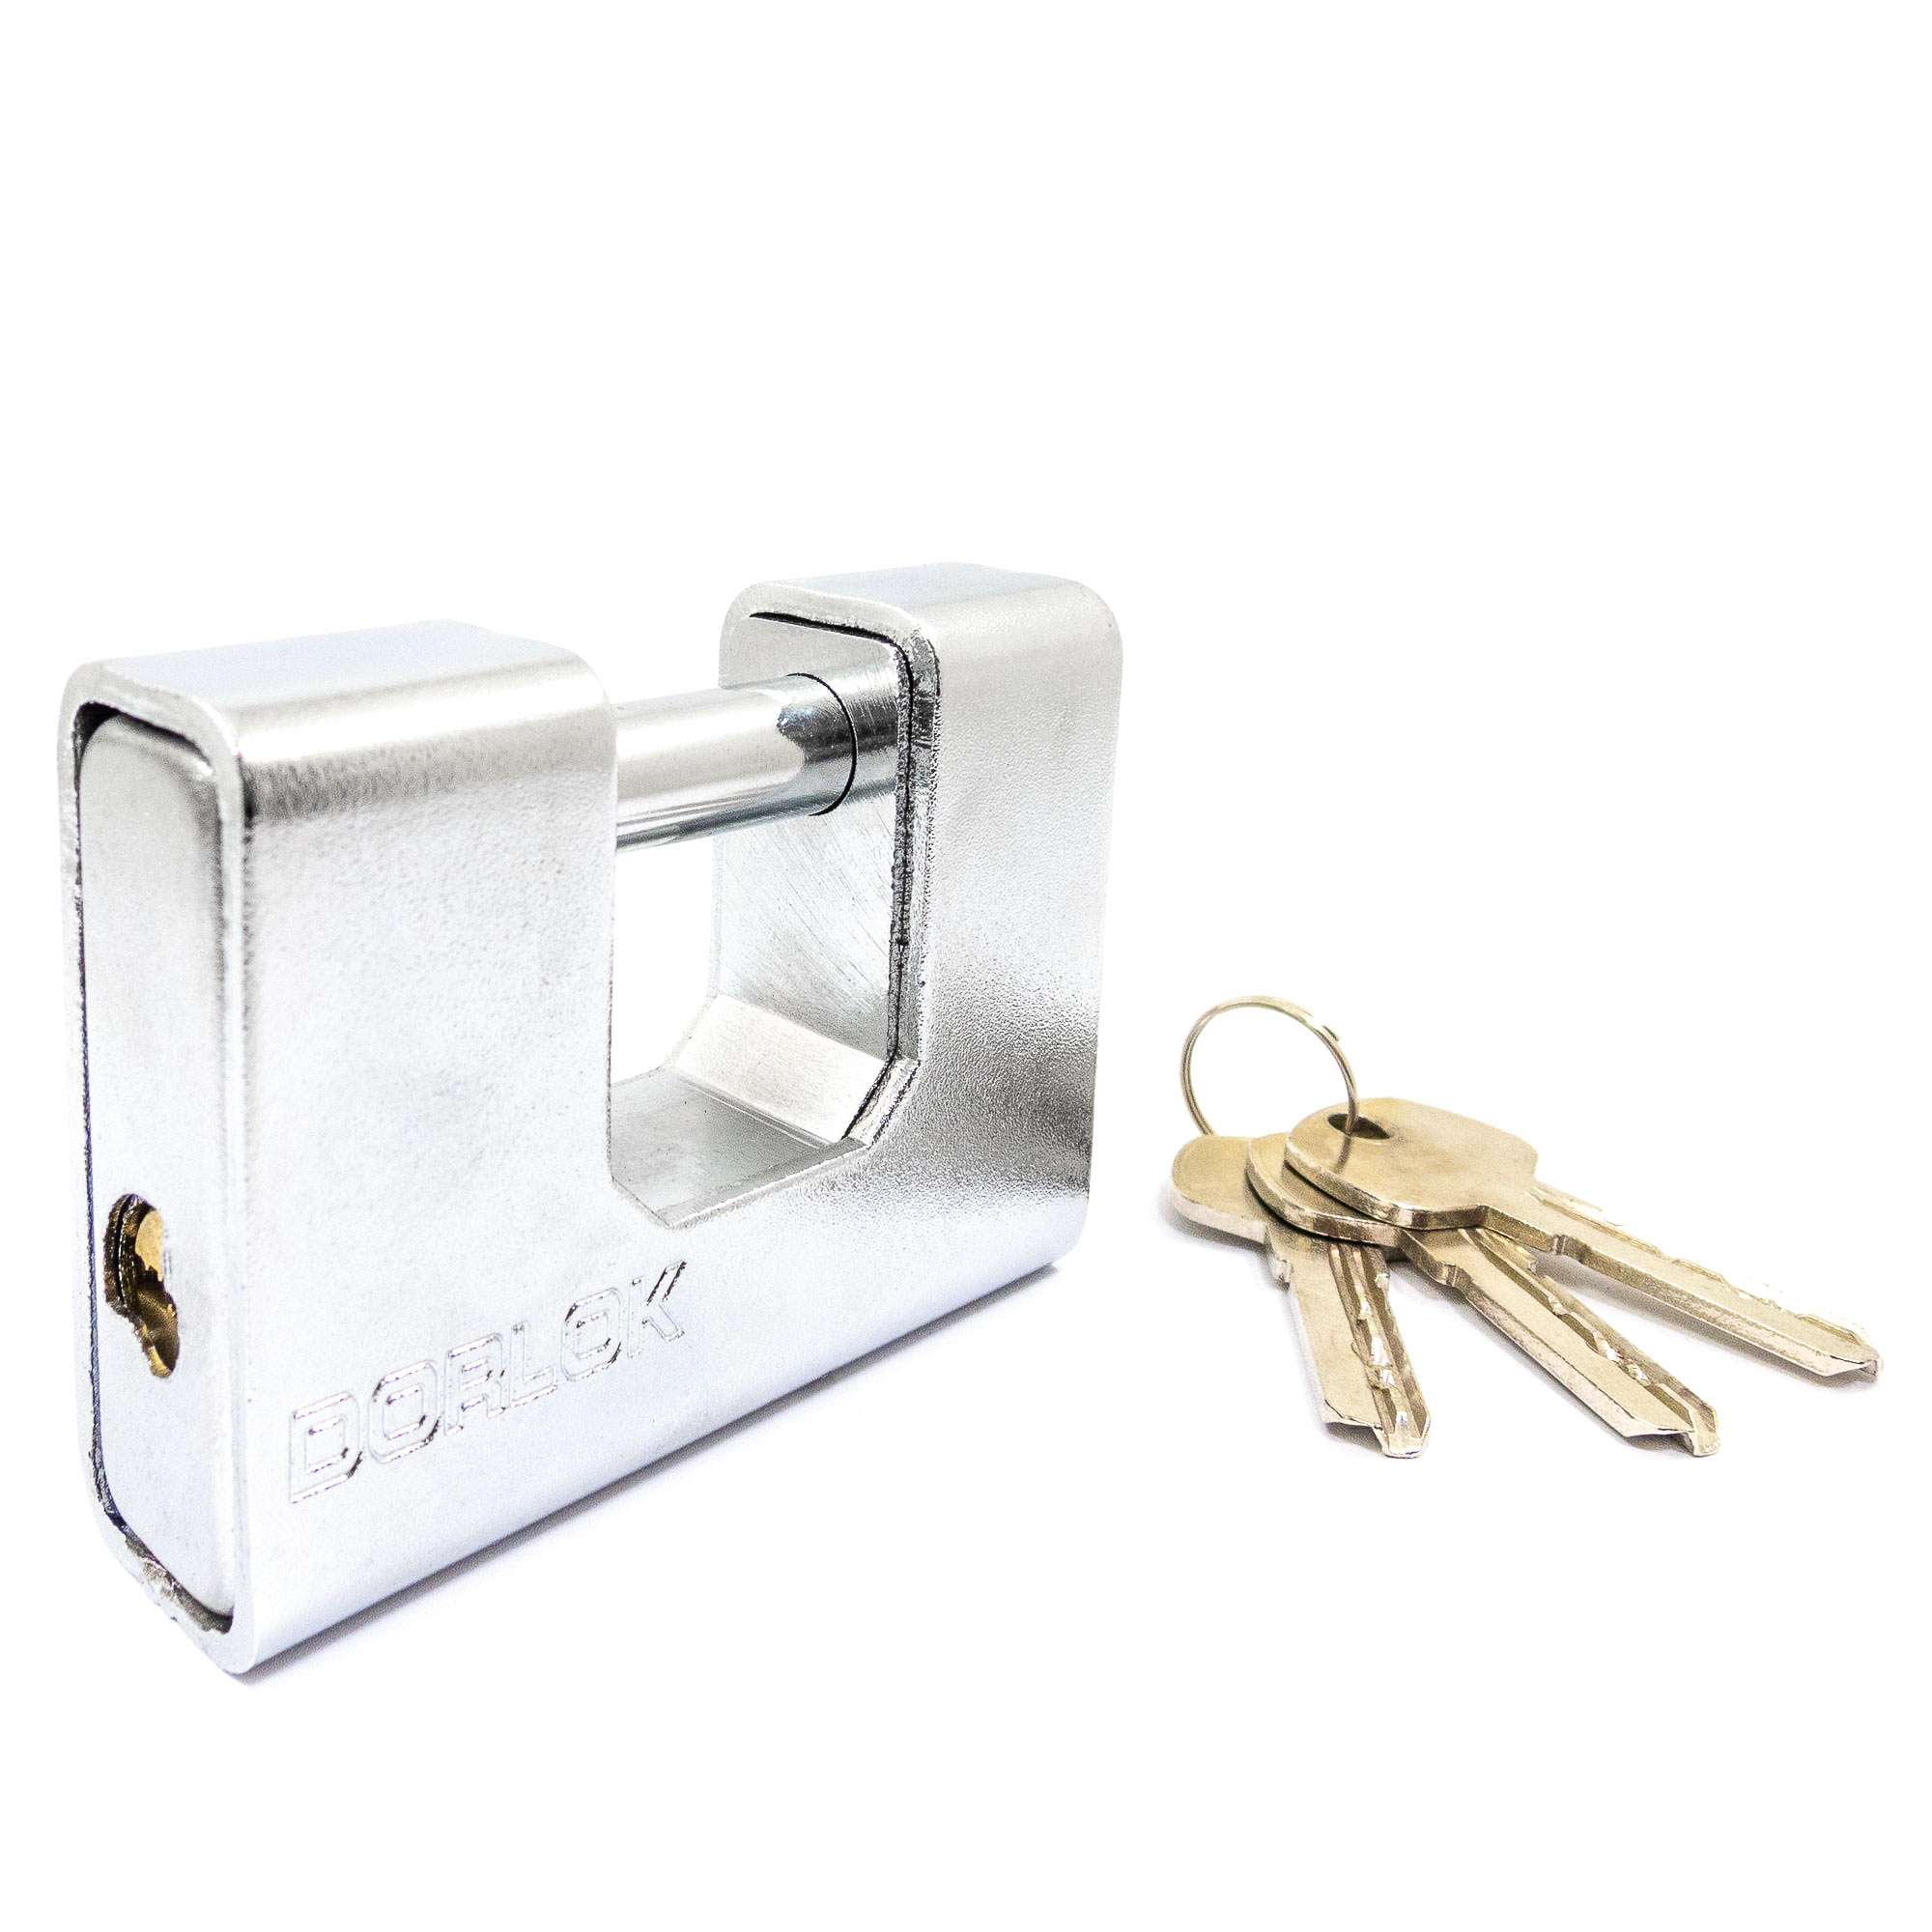 3-3/4" (90mm) Heavy Duty Type Rectangle Steel Armored Iron Padlock with 3 Keys - 2